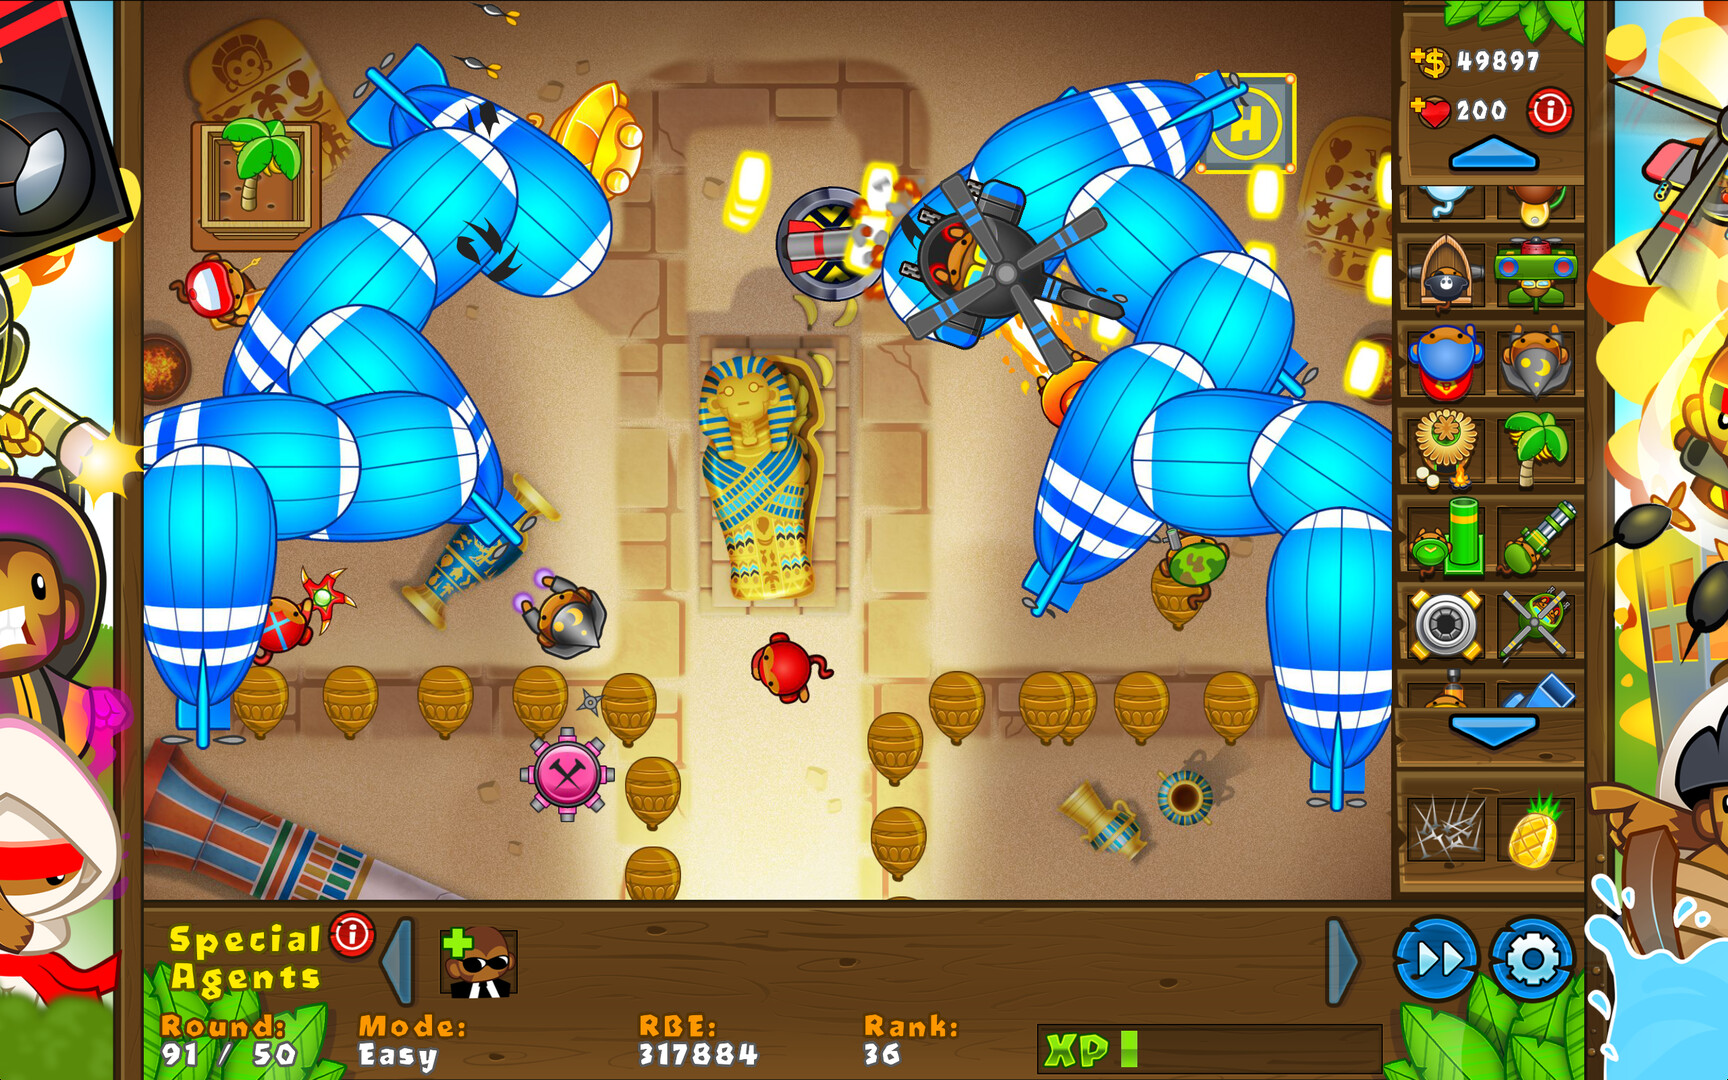 Bloons TD 5 on Steam